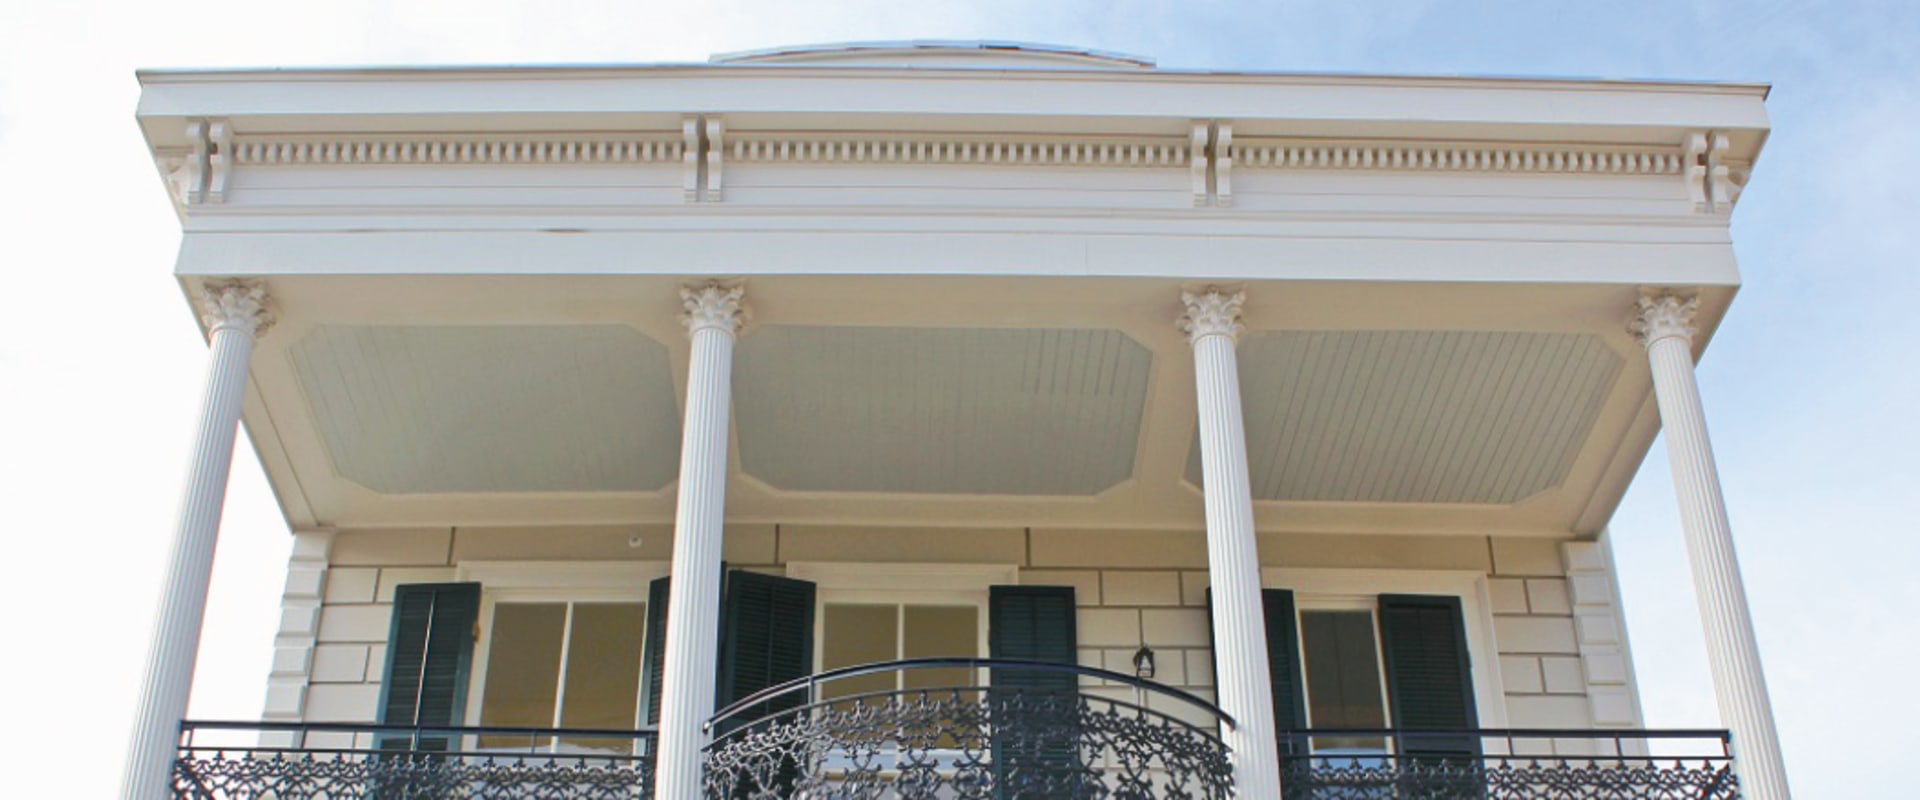 Preserving New Orleans' Historic Homes Through Remodeling